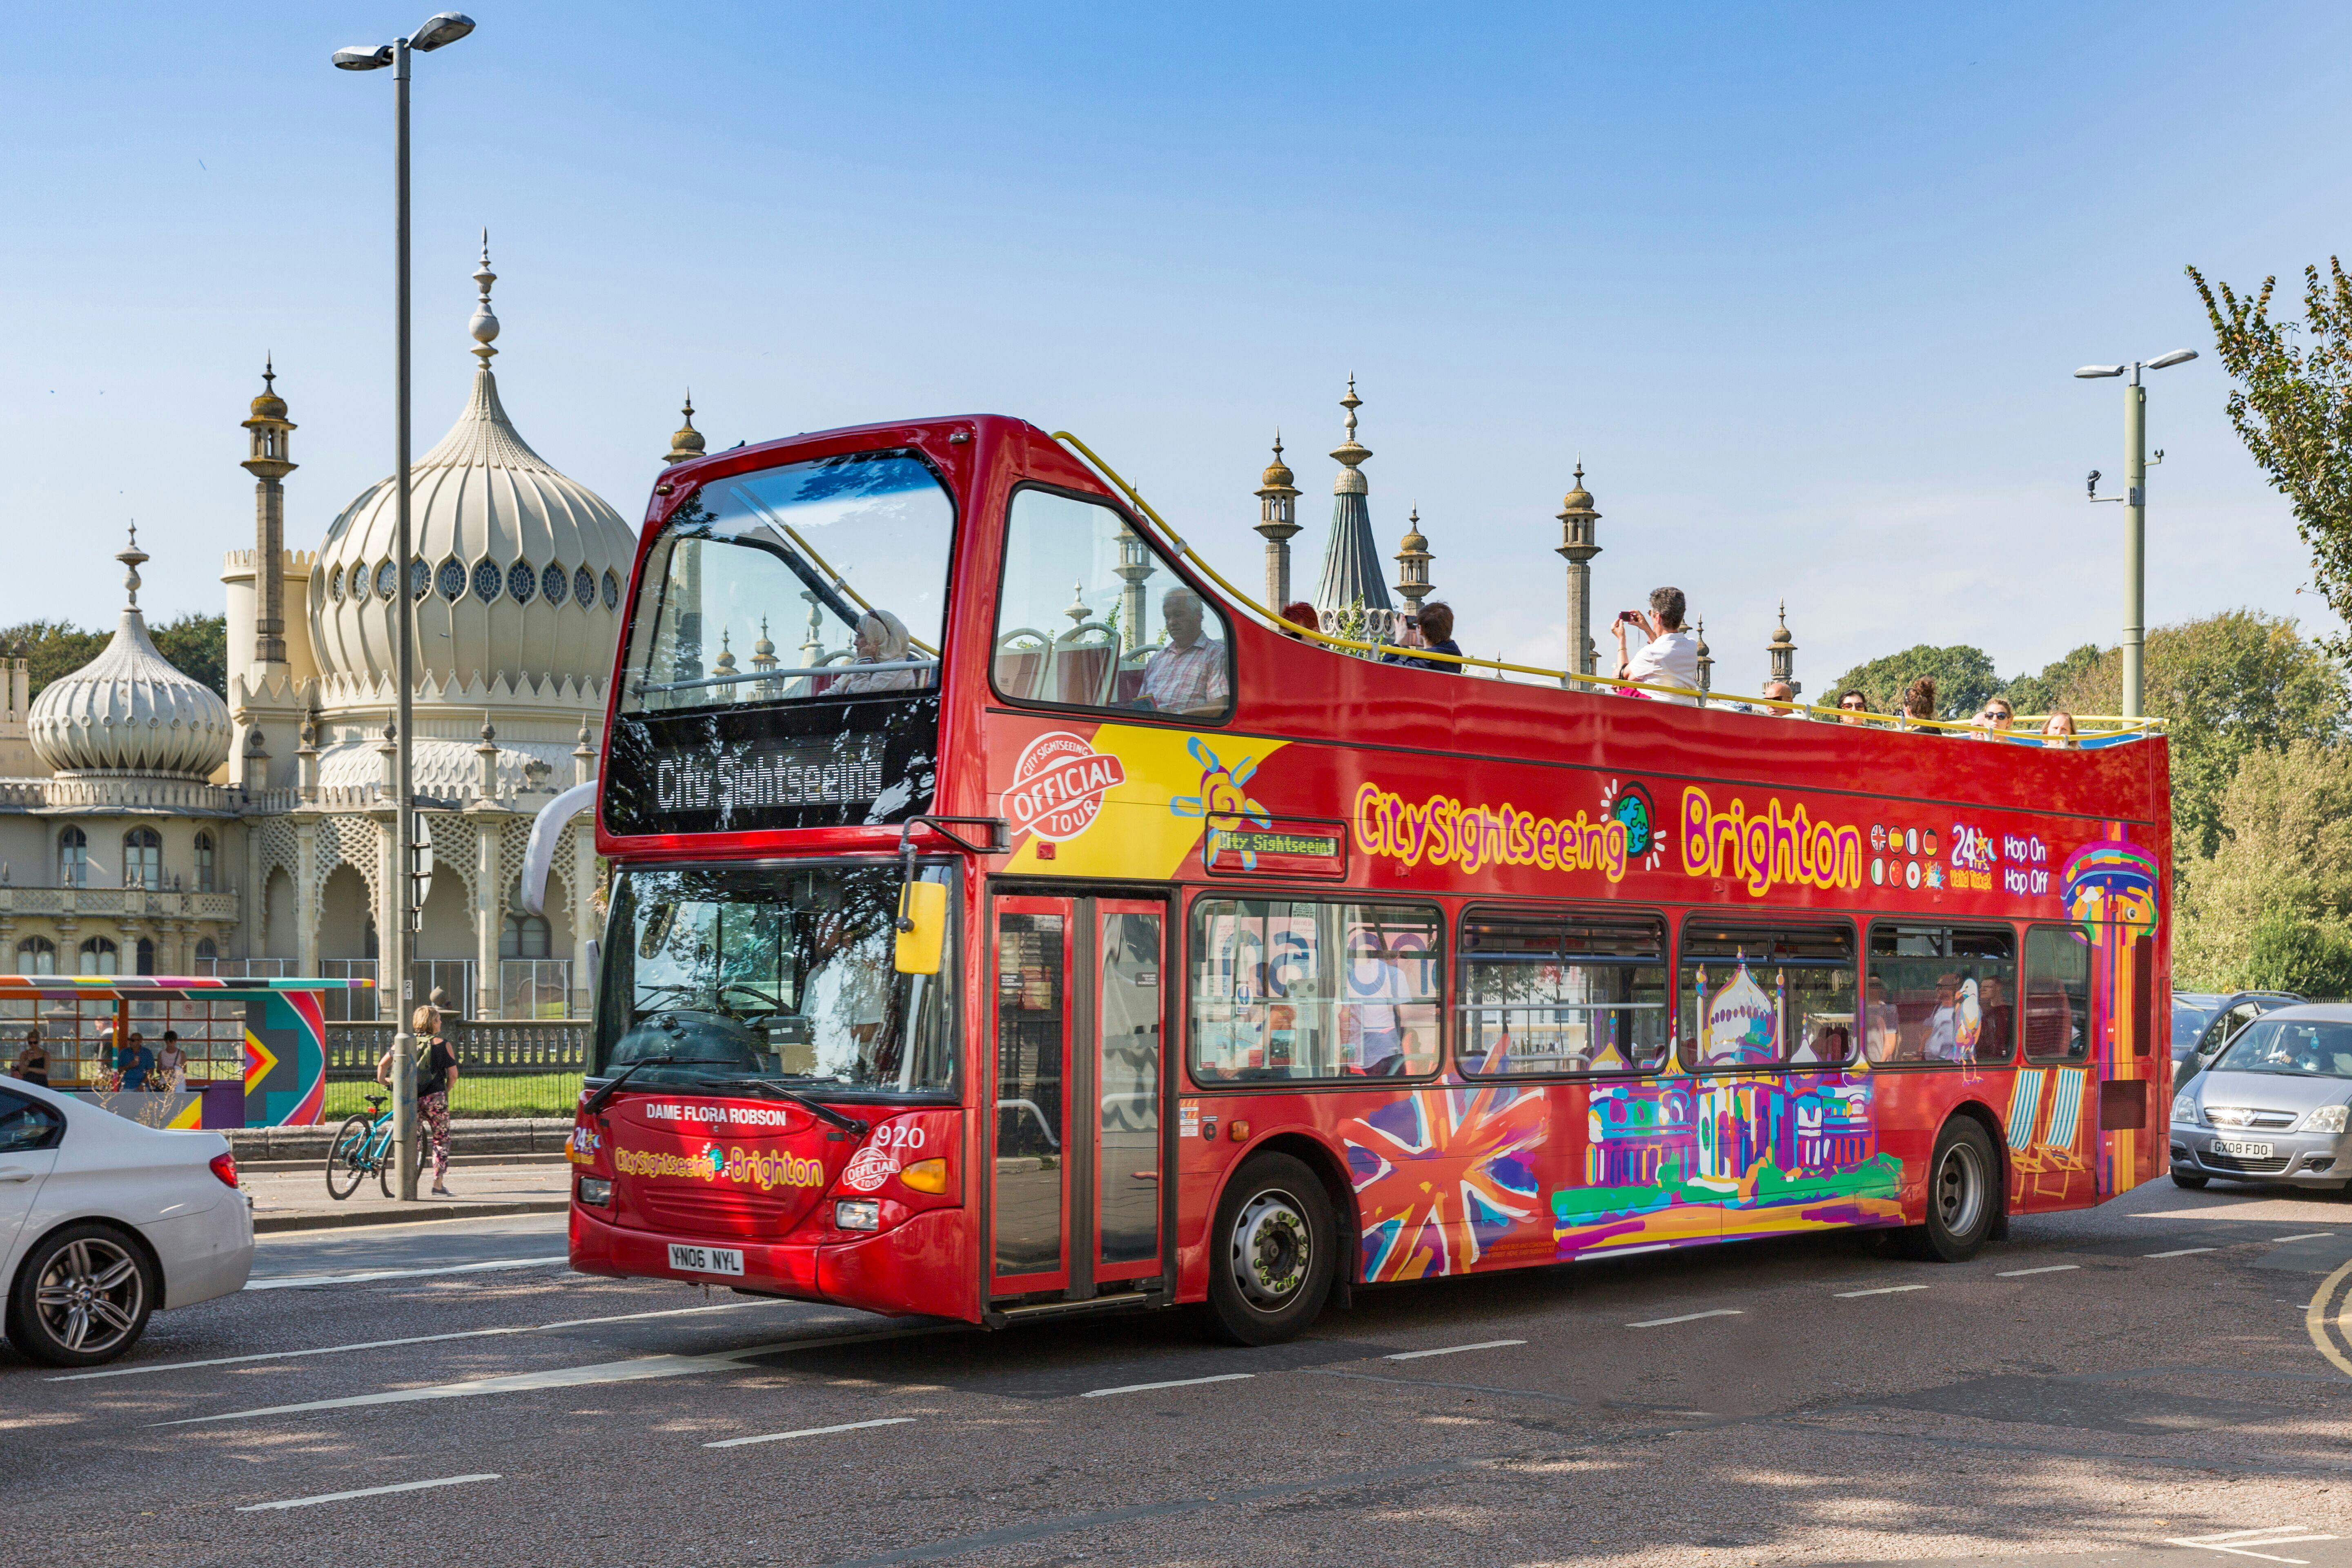 City Sightseeing hop-on hop-off bus tour of Brighton